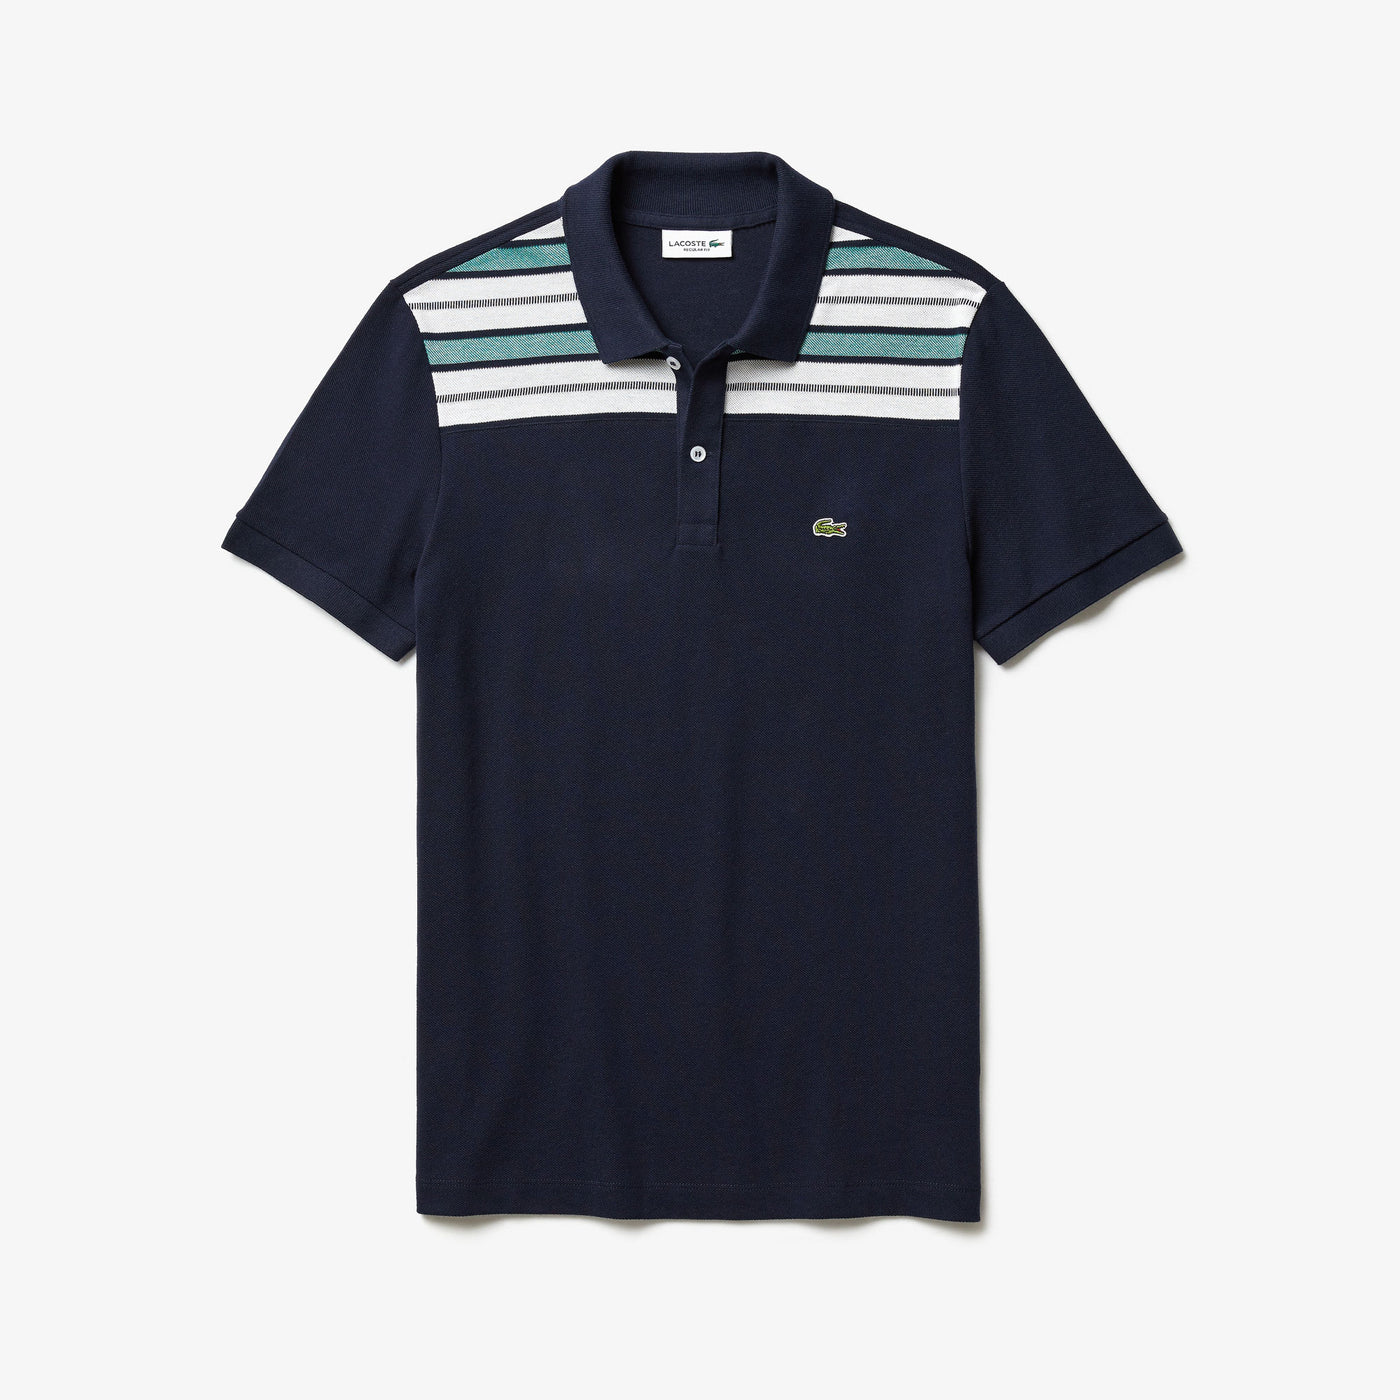 Shop The Latest Collection Of Outlet - Lacoste Men'S Lacoste Striped Pane Polo Shirt - Ph5101 In Lebanon